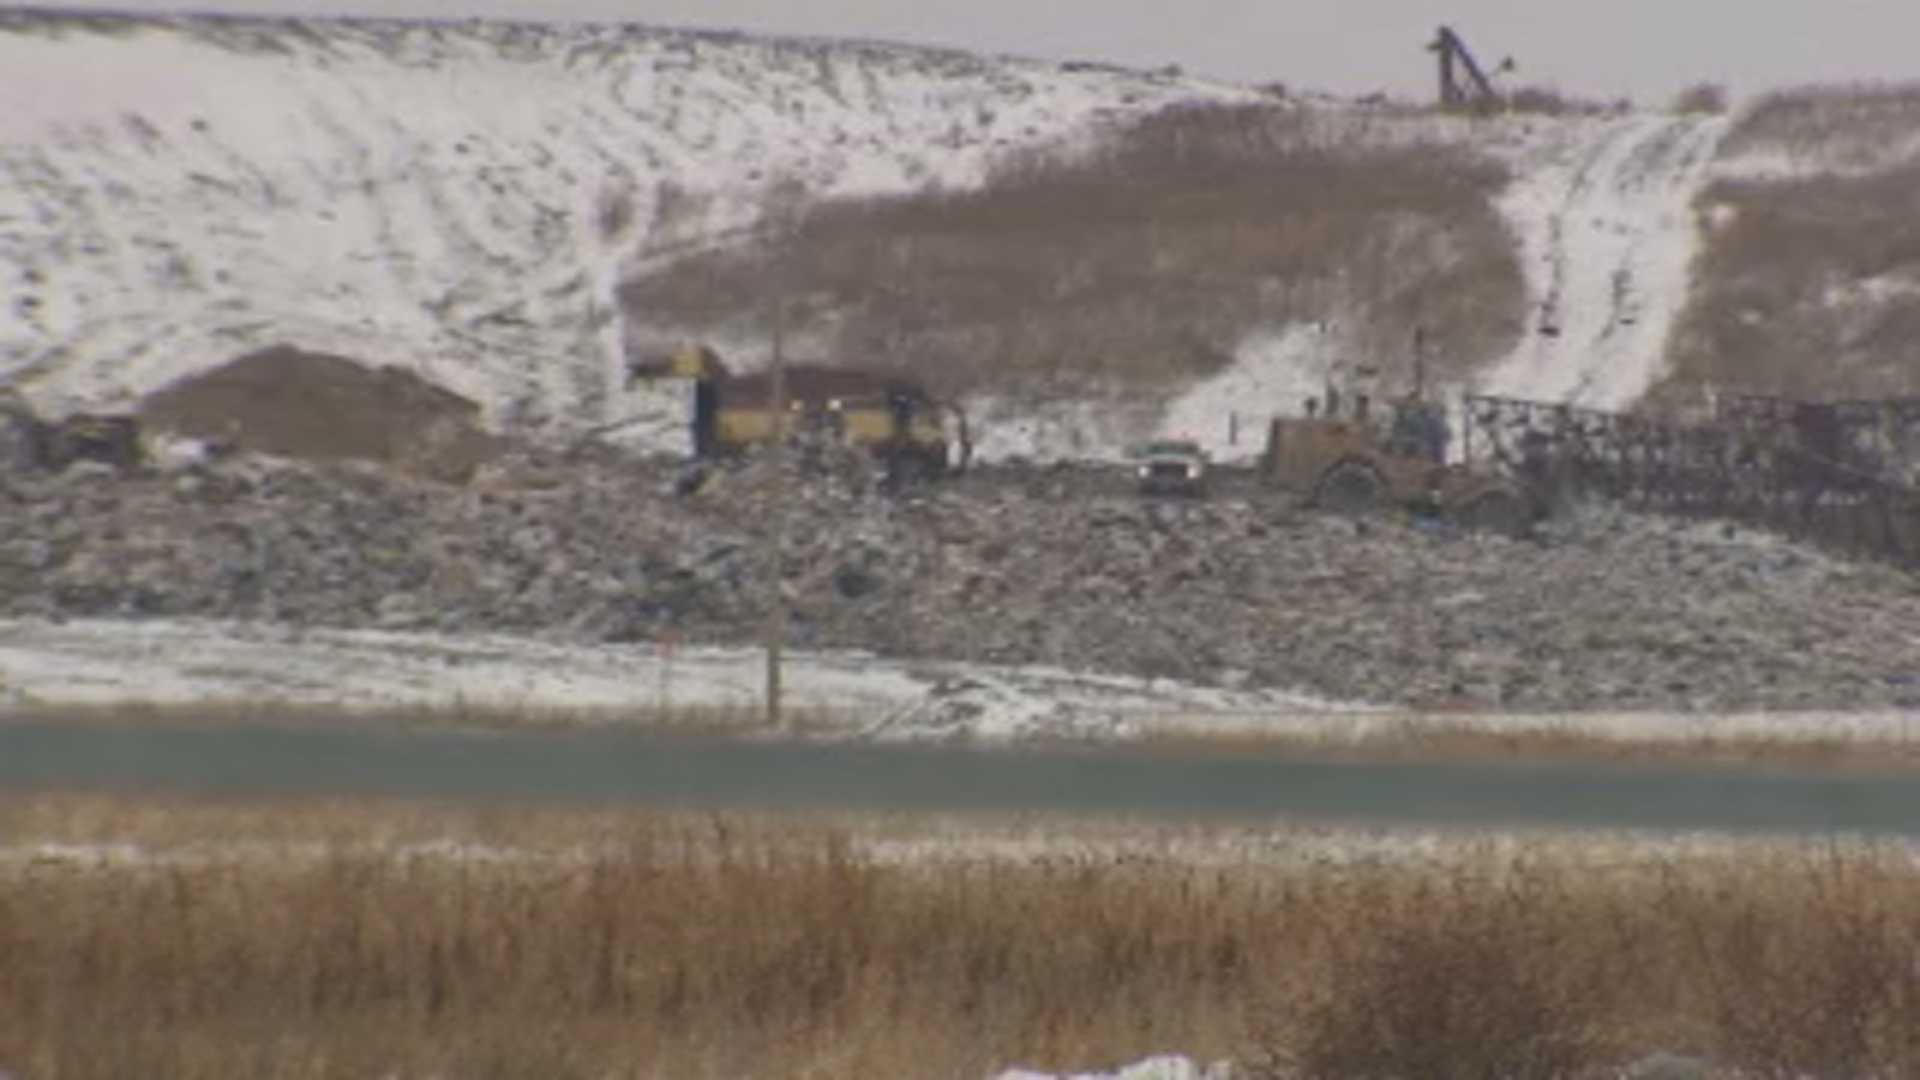 Winnipeg’s Brady Road Landfill to reopen while protesters remain on site, city says – Winnipeg | Globalnews.ca